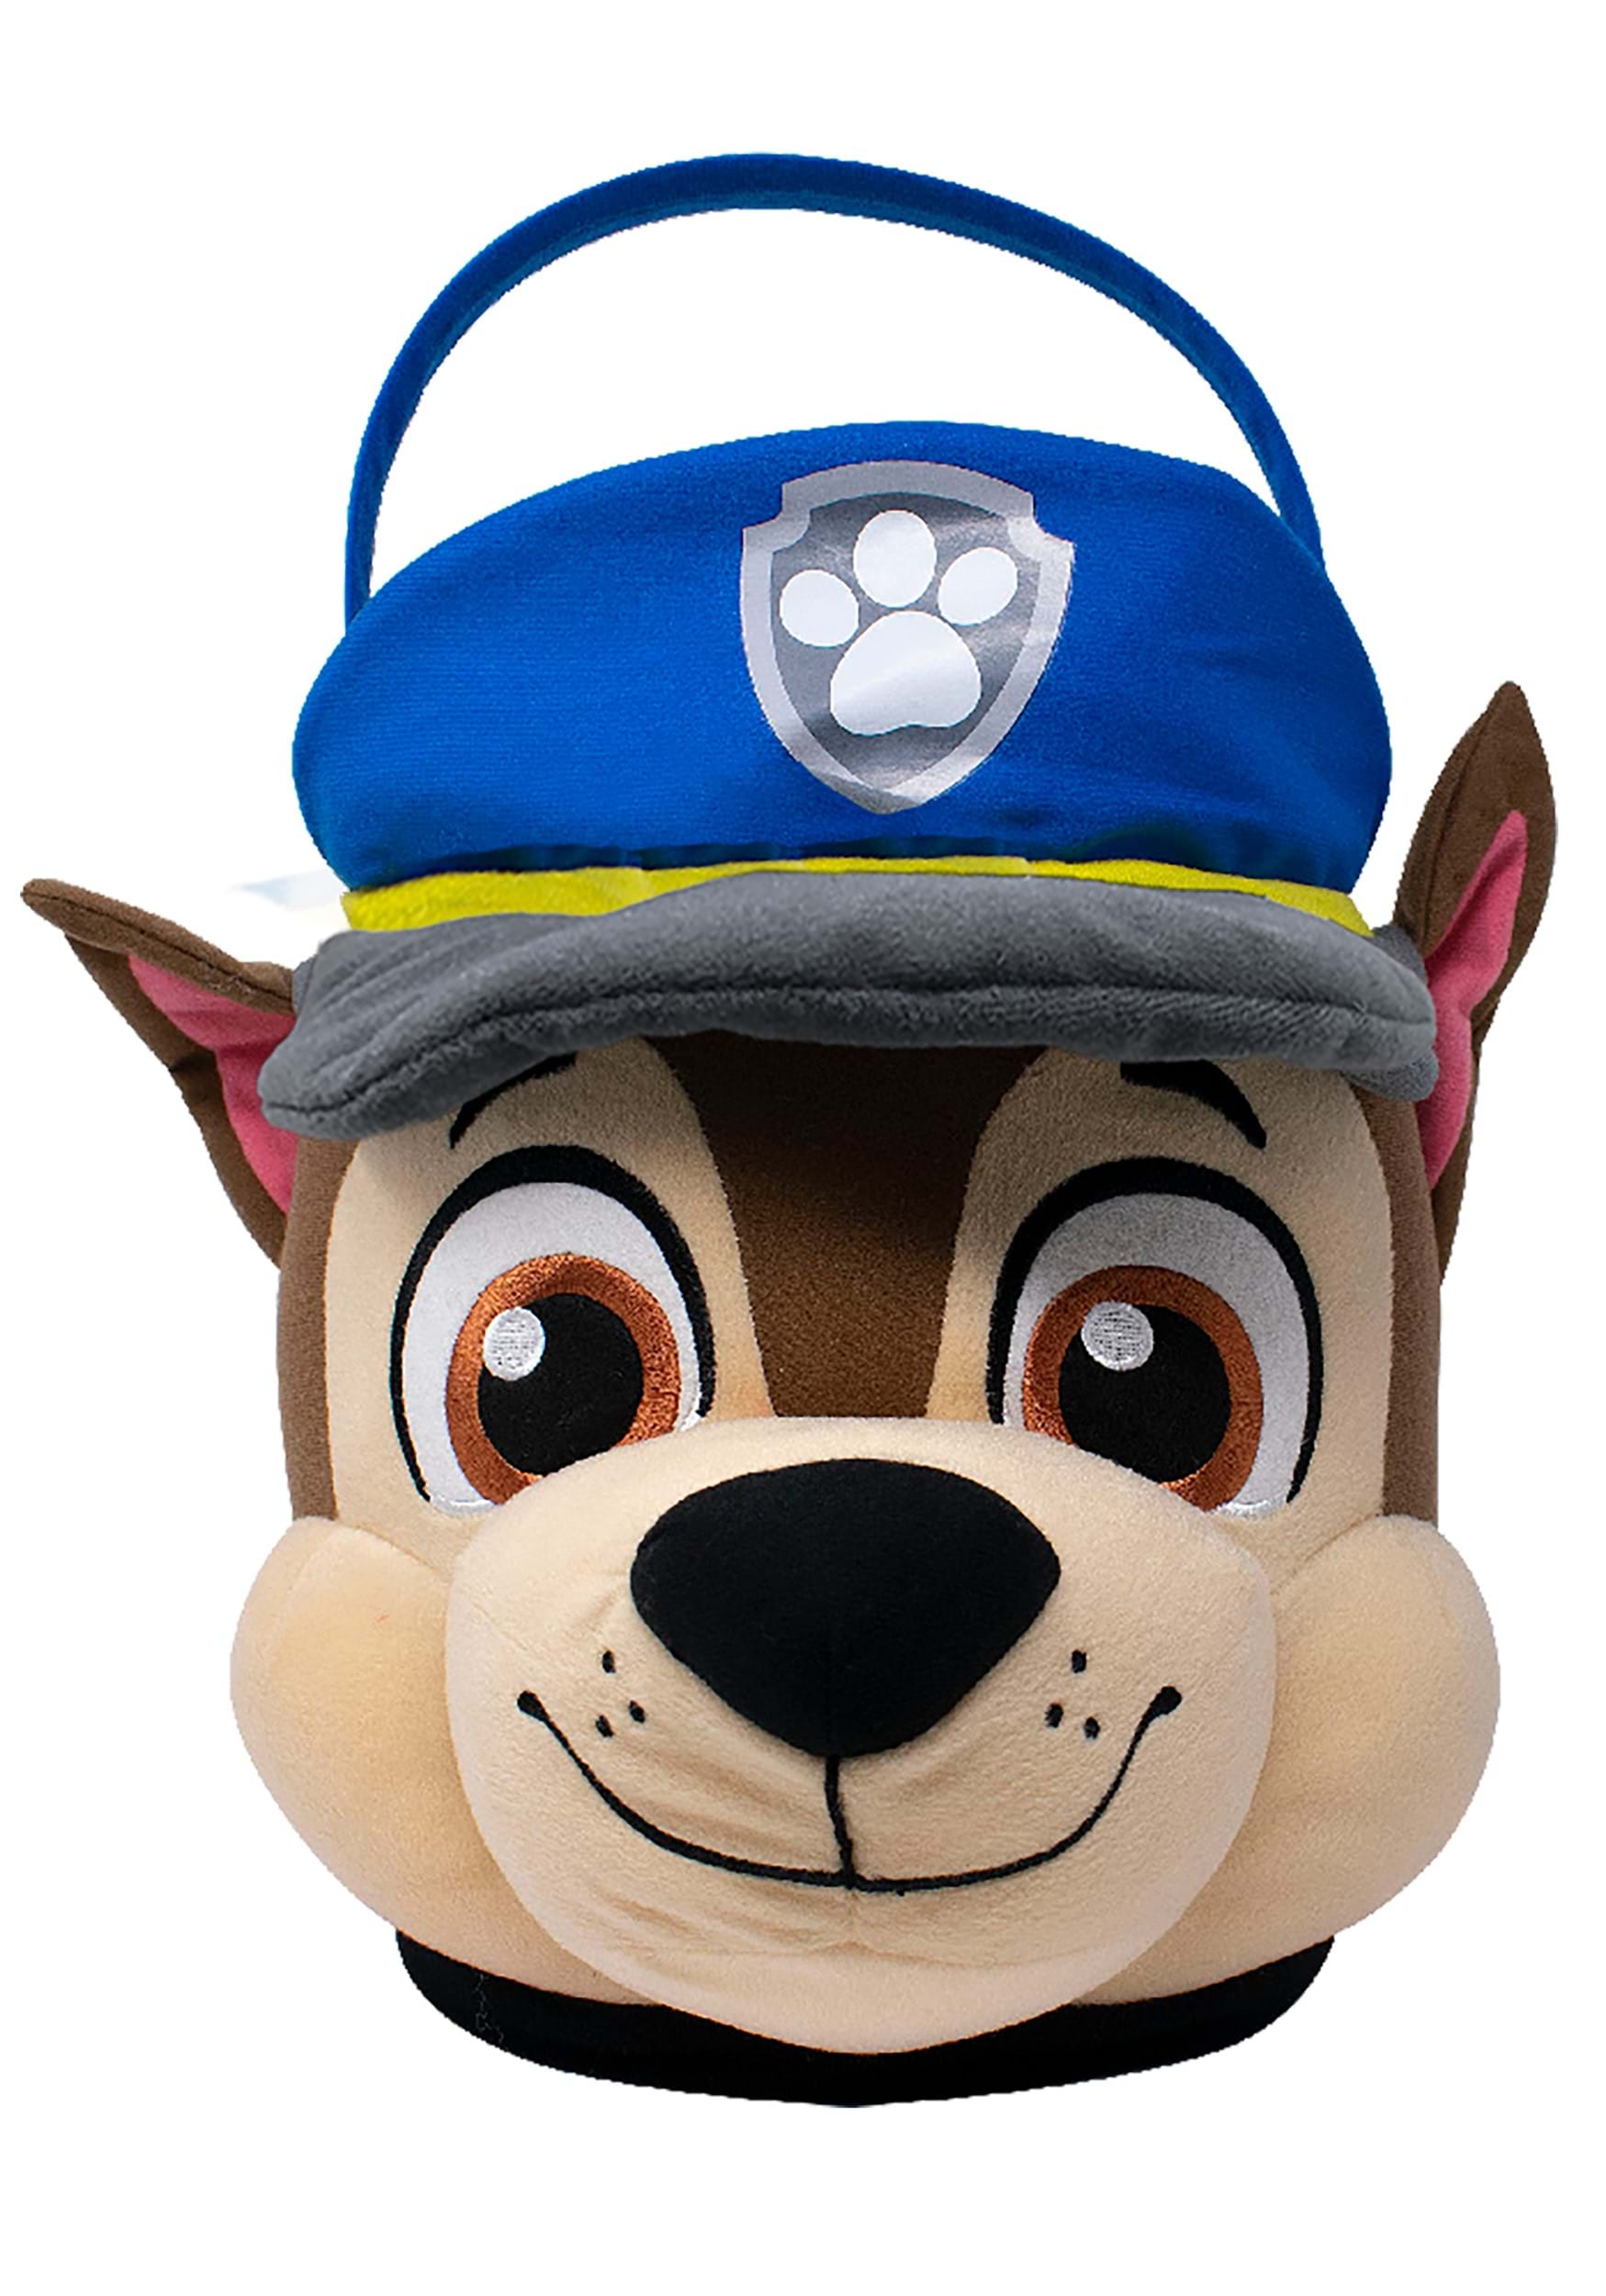 https://images.fun.com/products/83652/1-1/paw-patrol-chase-trick-or-treat-plush.jpg